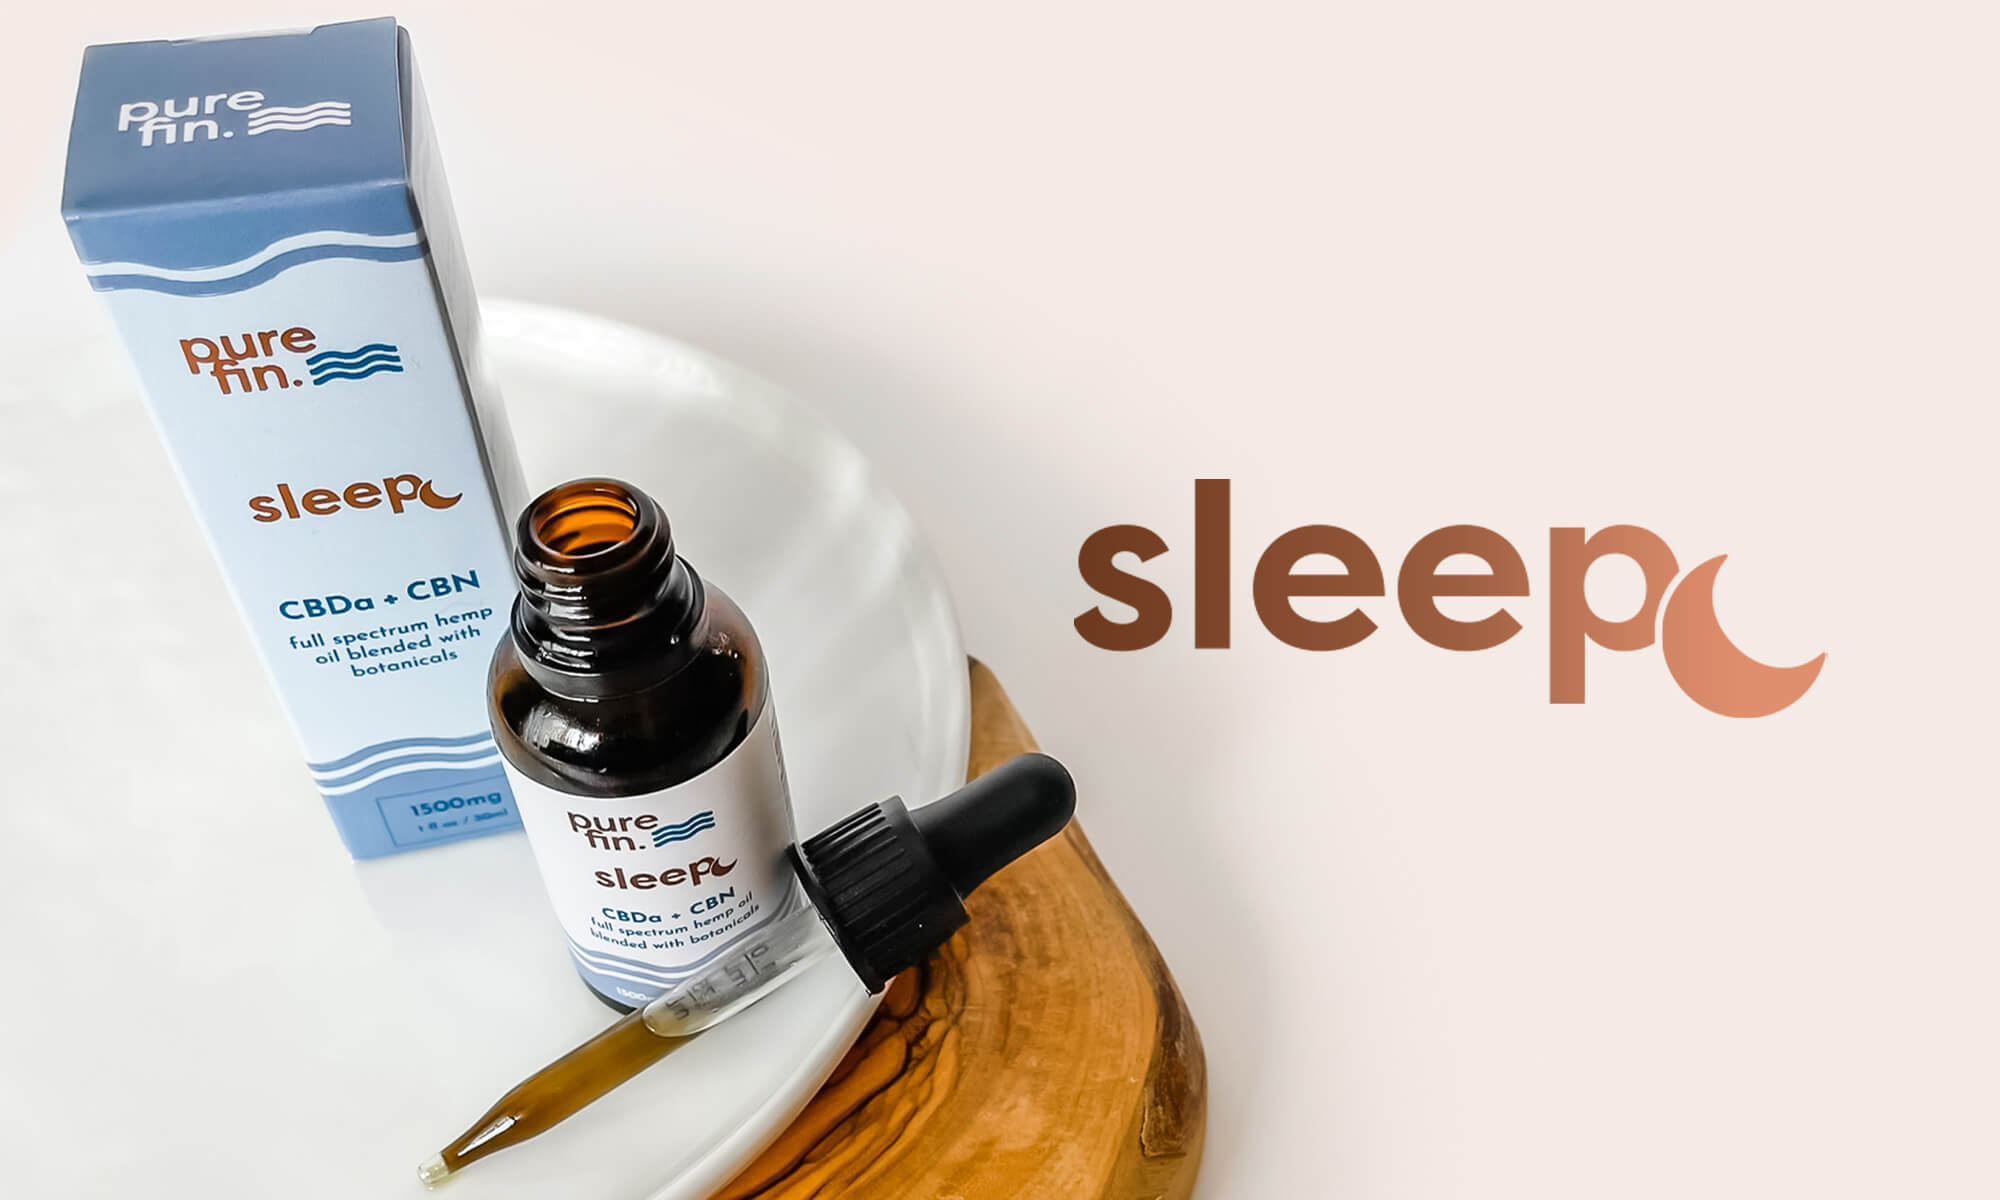 The most common Sleep Oil questions, answered